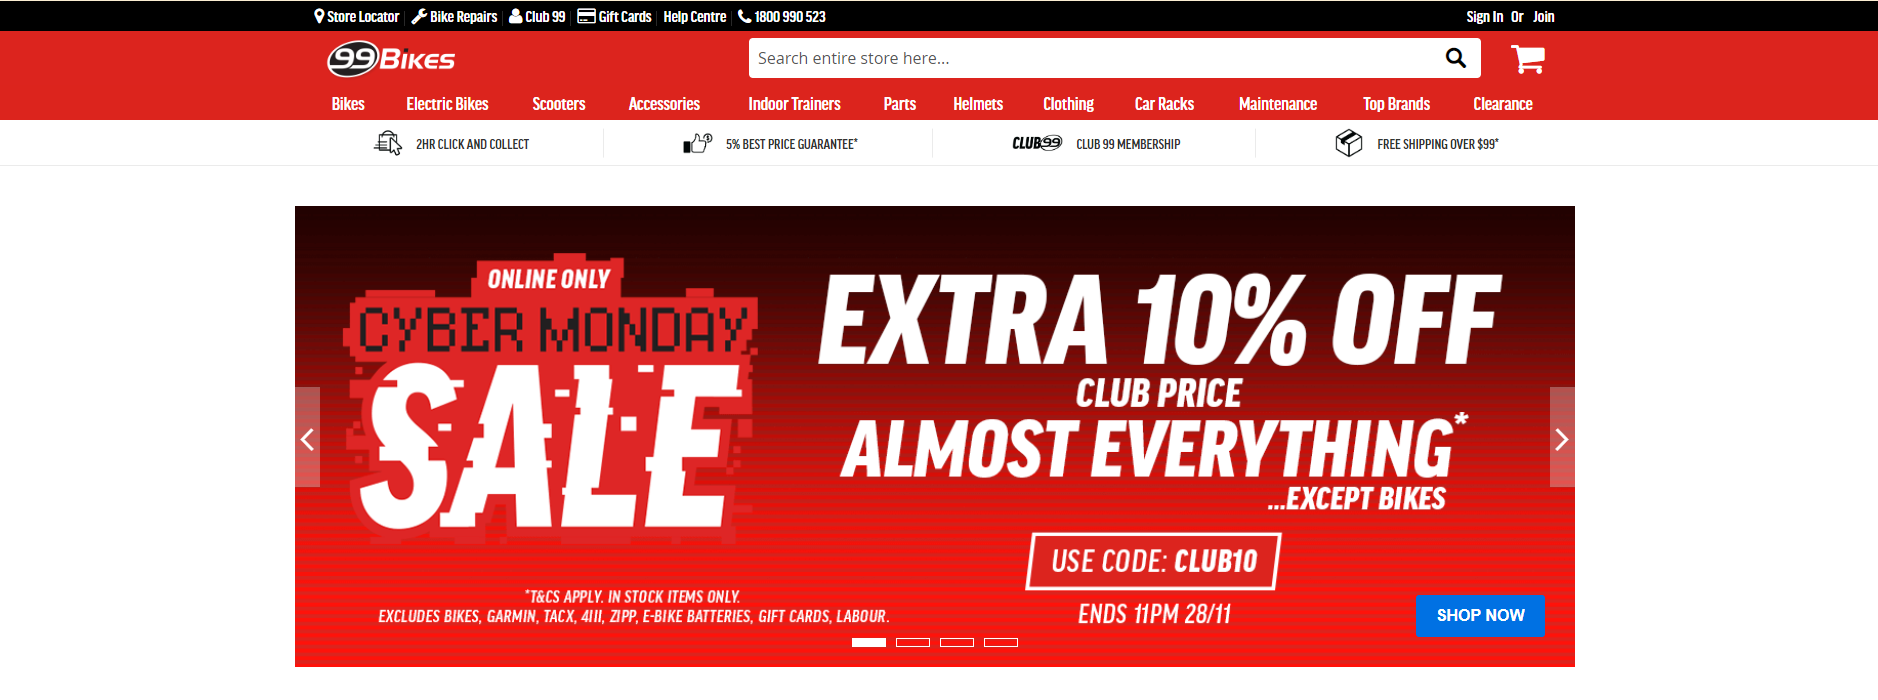 99Bikes Cyber Monday - Extra 10% OFF almost everything with coupon